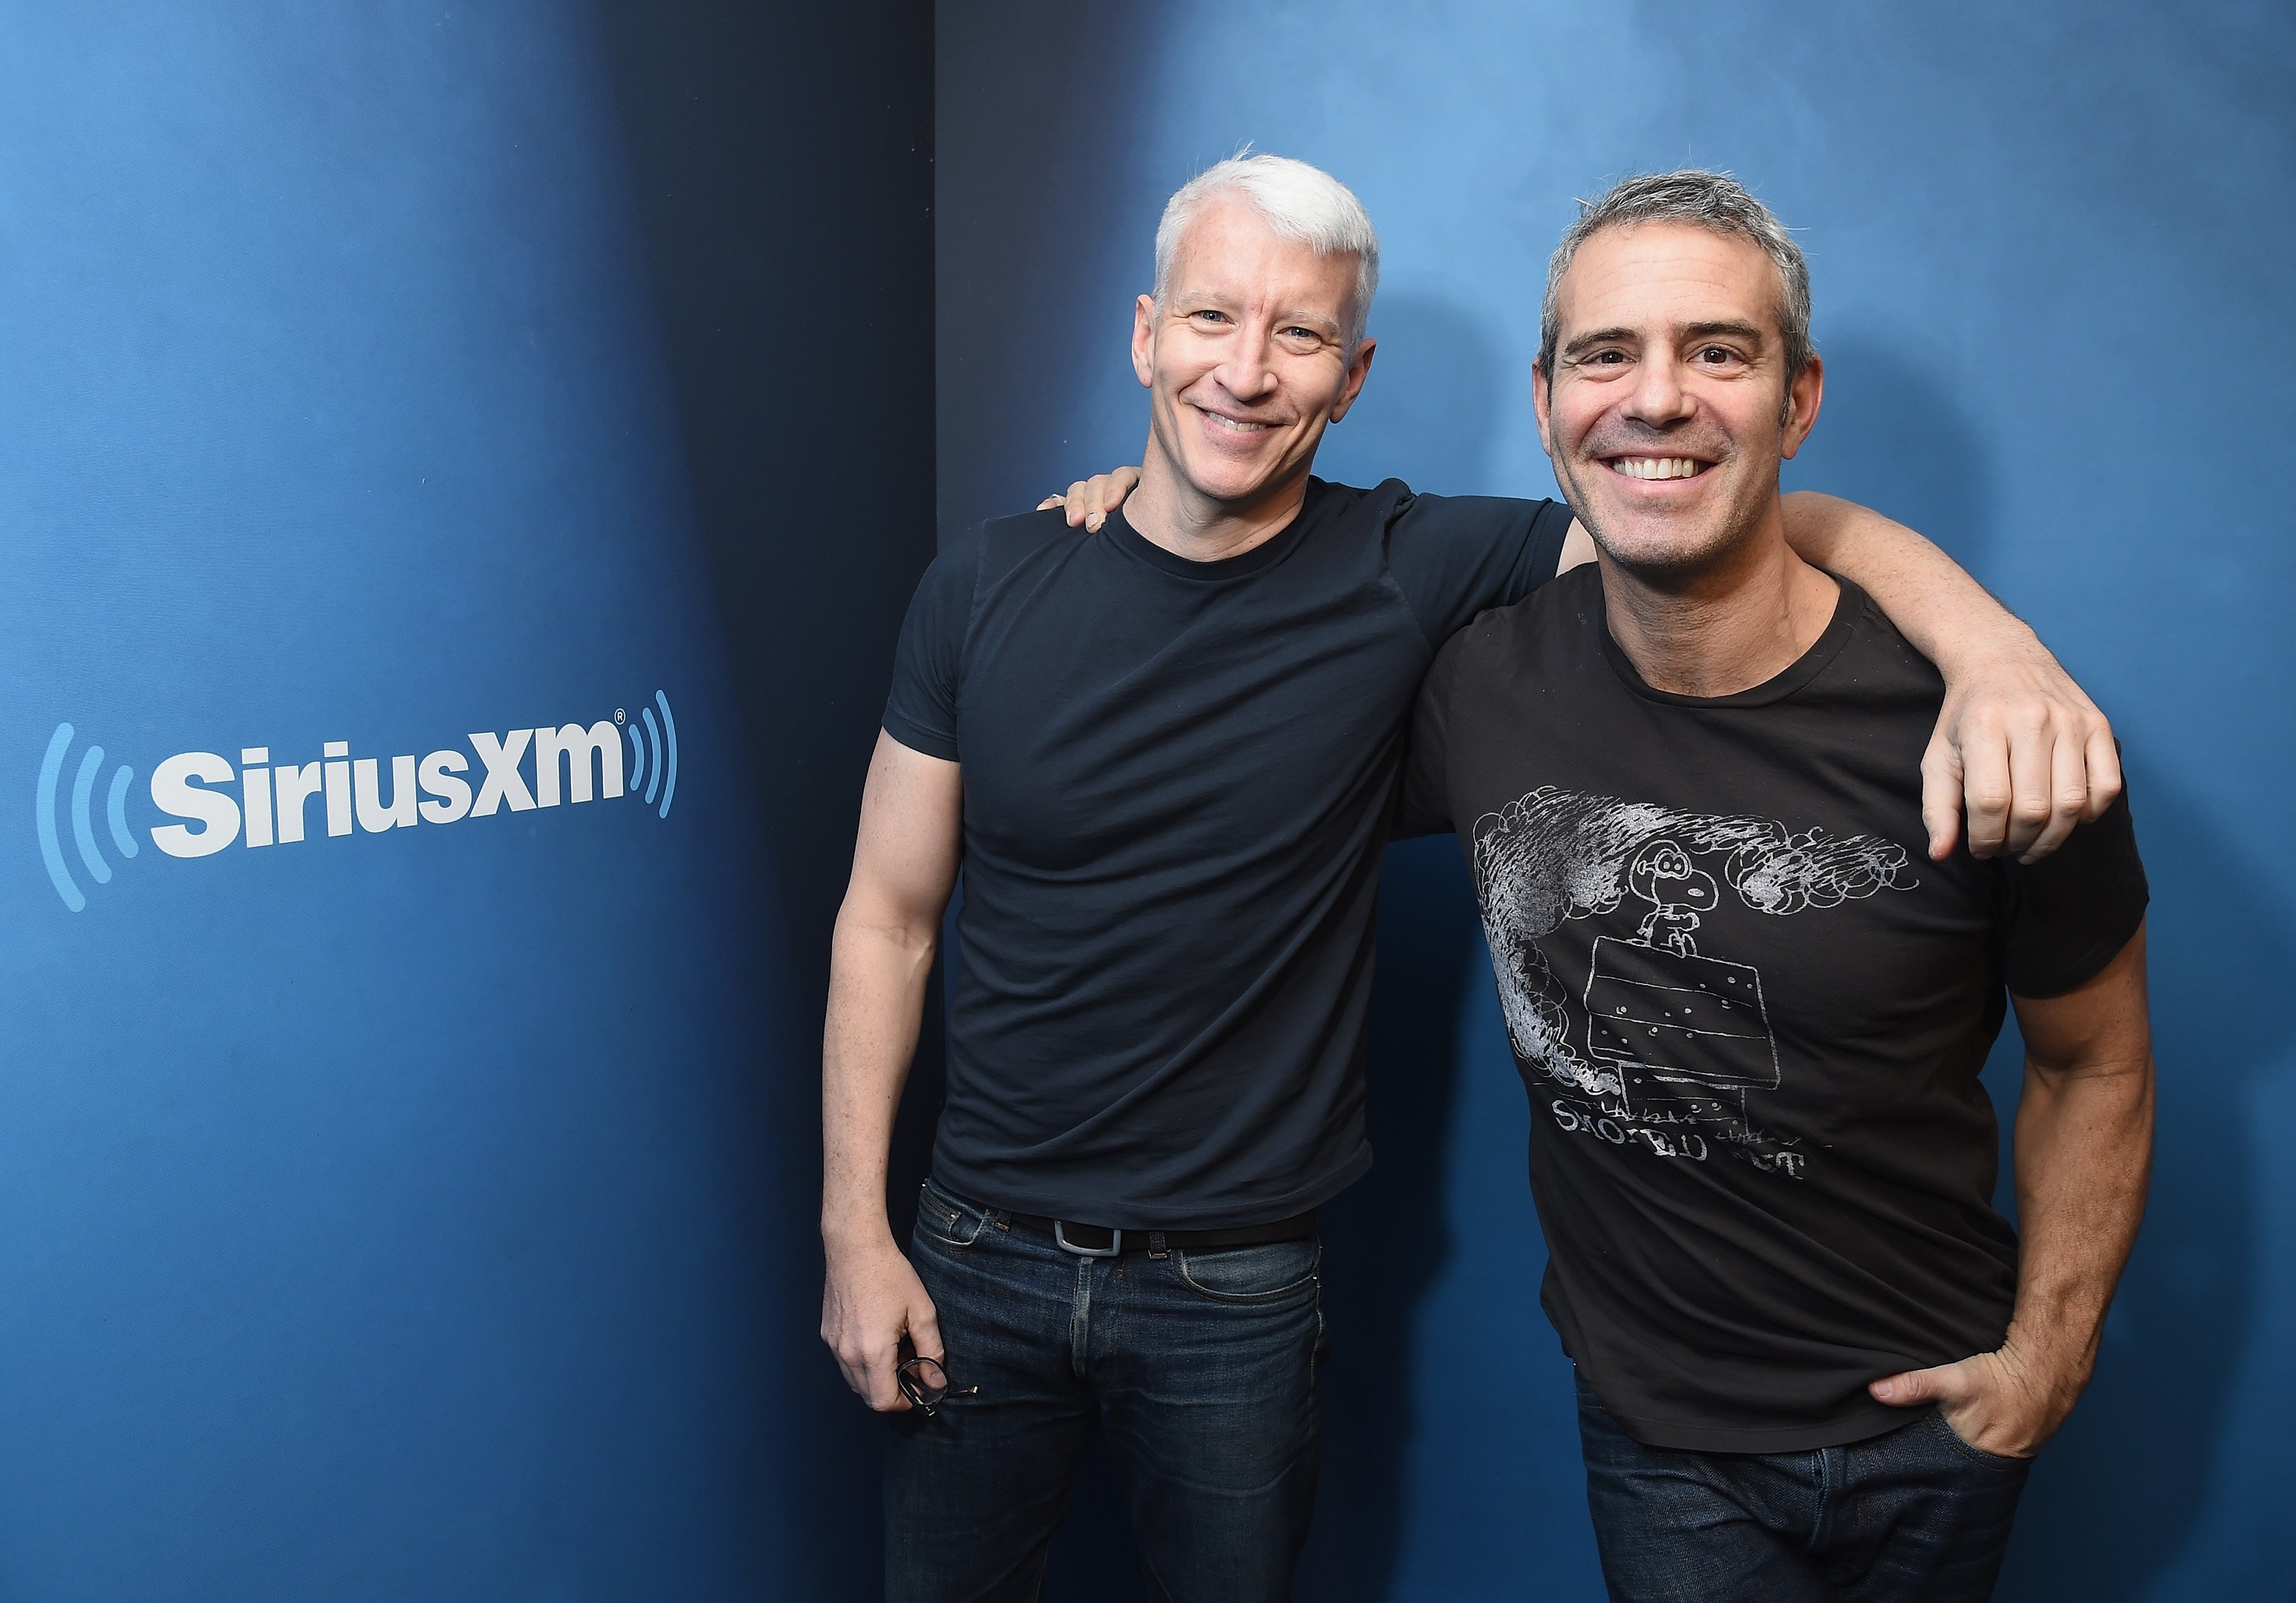 Anderson Cooper and Andy Cohen at SiriusXM Studios on January 13, 2017 in New York City | Photo: Getty Images